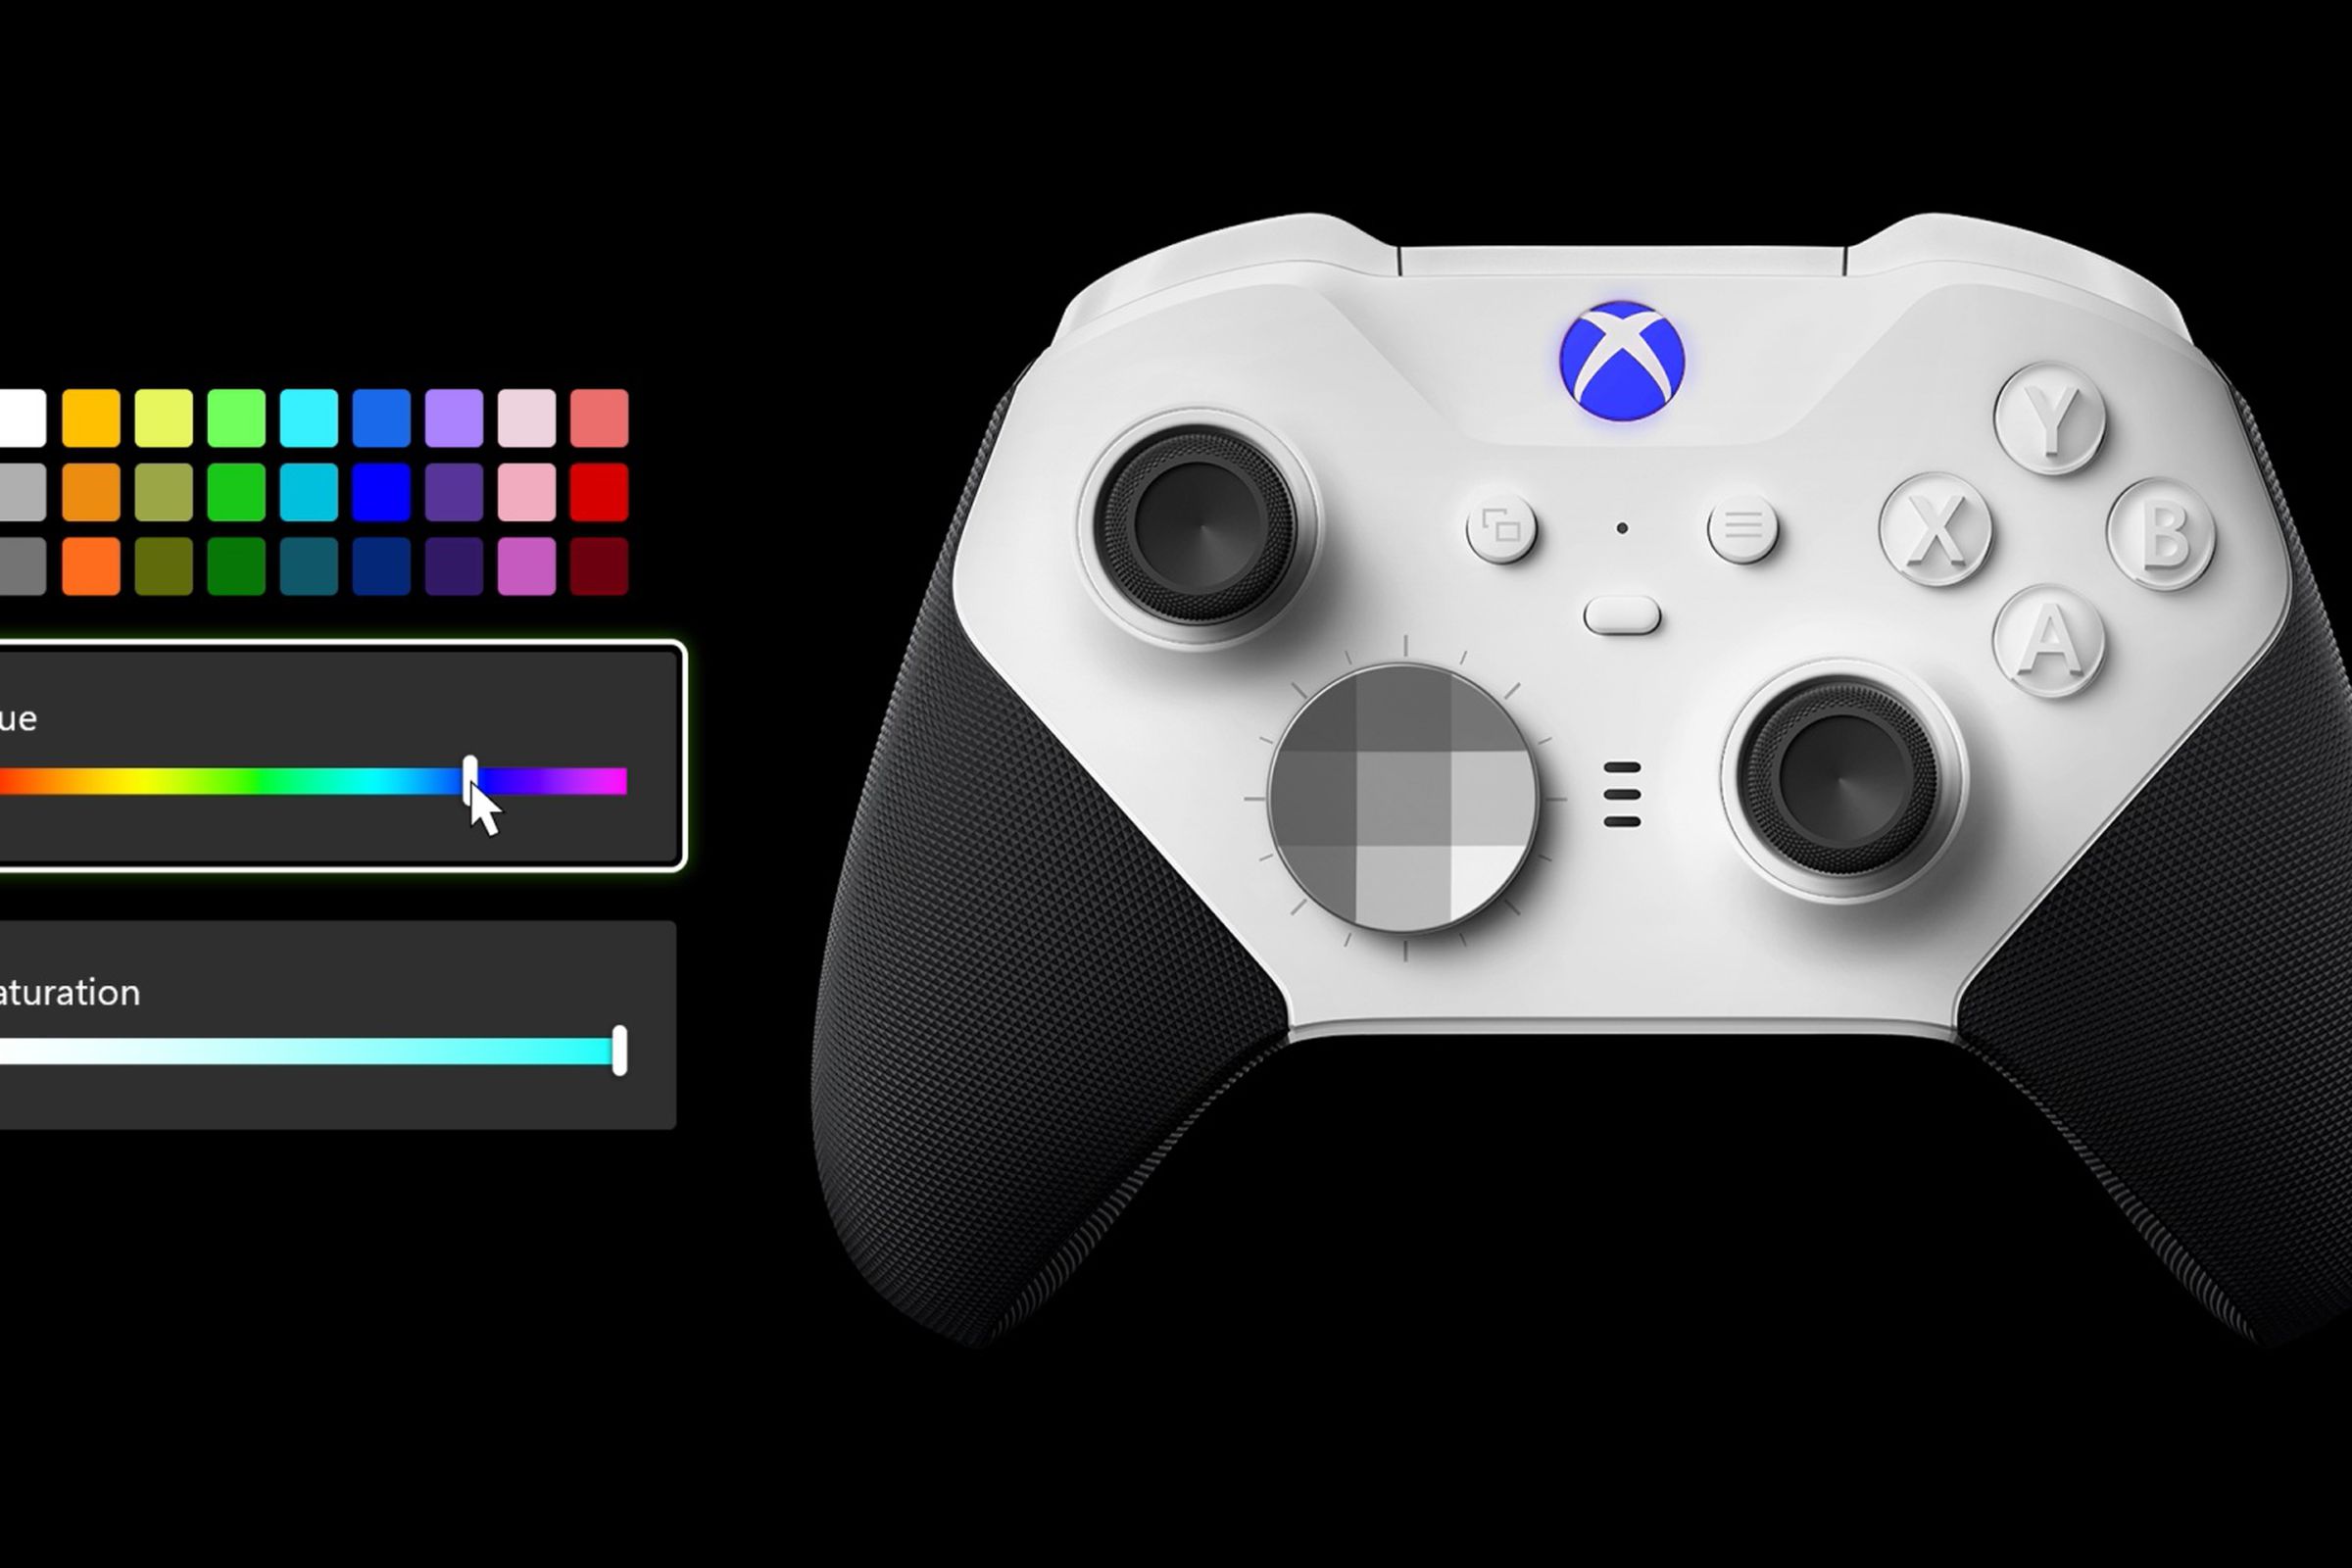 Microsoft now supports RGB colors on Xbox Elite 2 controllers